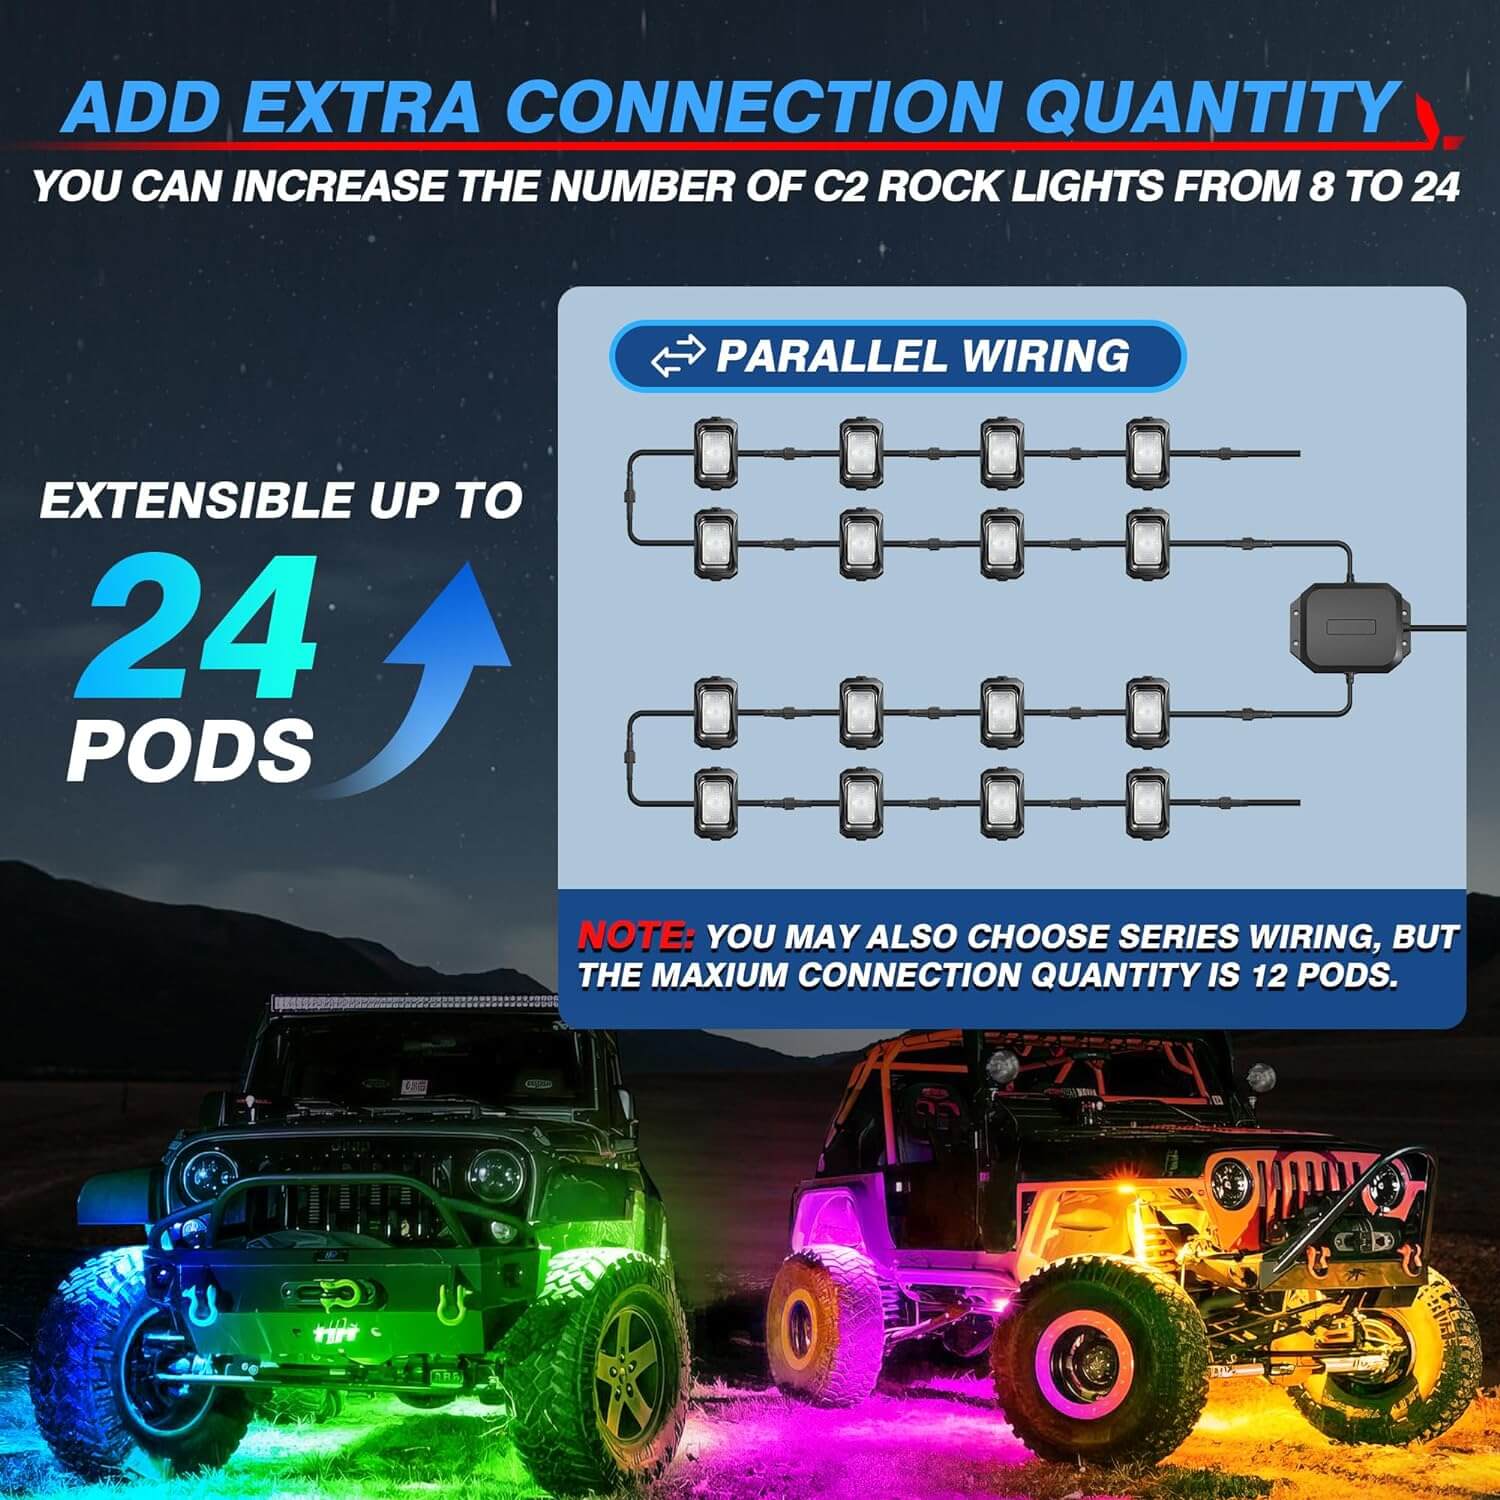 C2 RGB+IC LED Rock Lights Kit with 1pcs 6.56ft Extension Cable